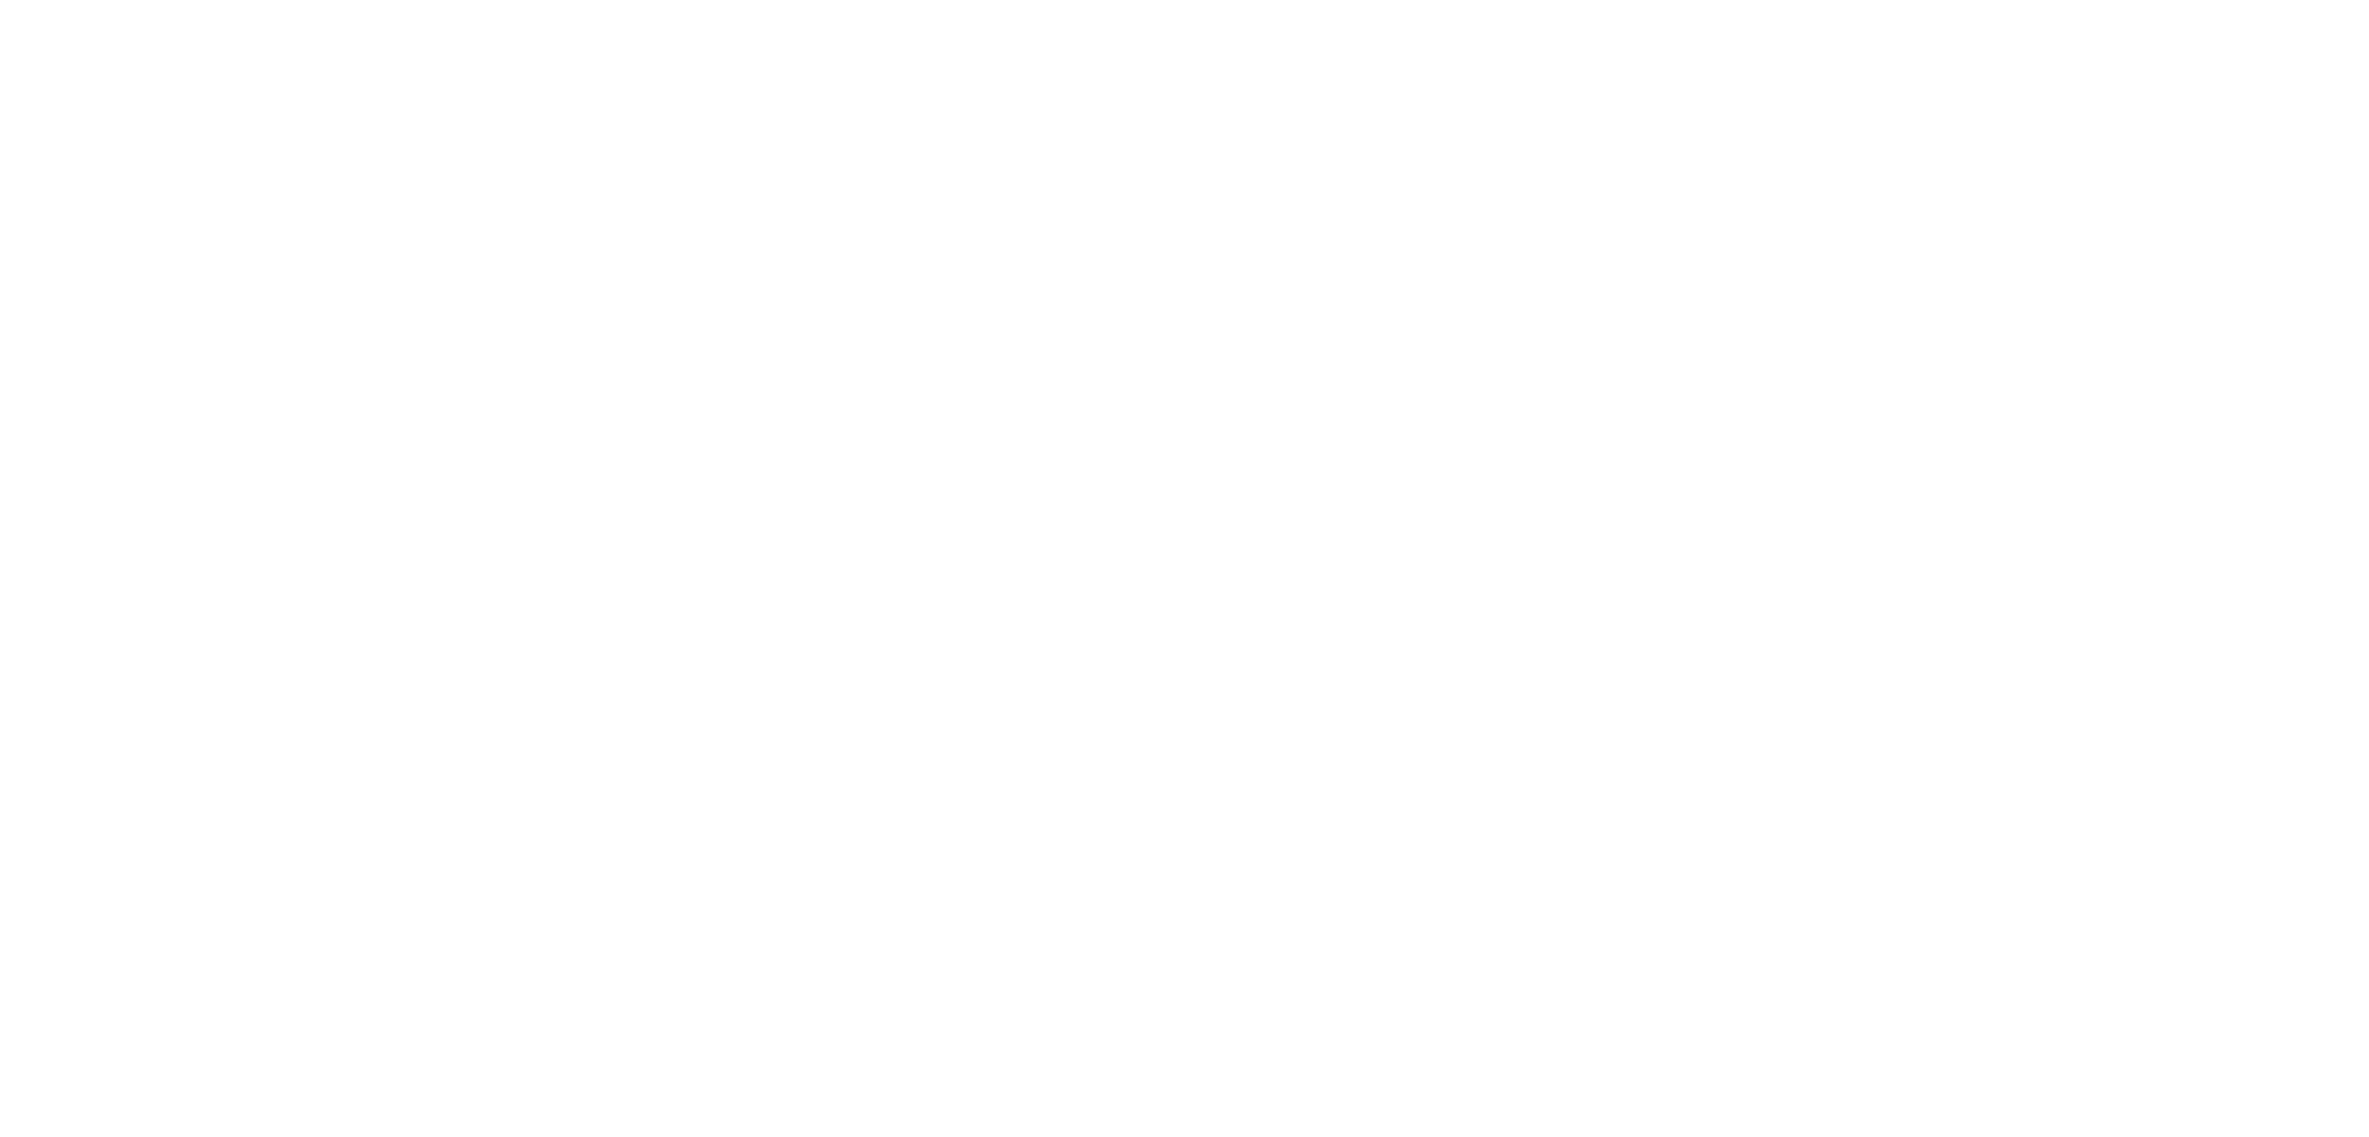 SEMICON Taiwan logo without date